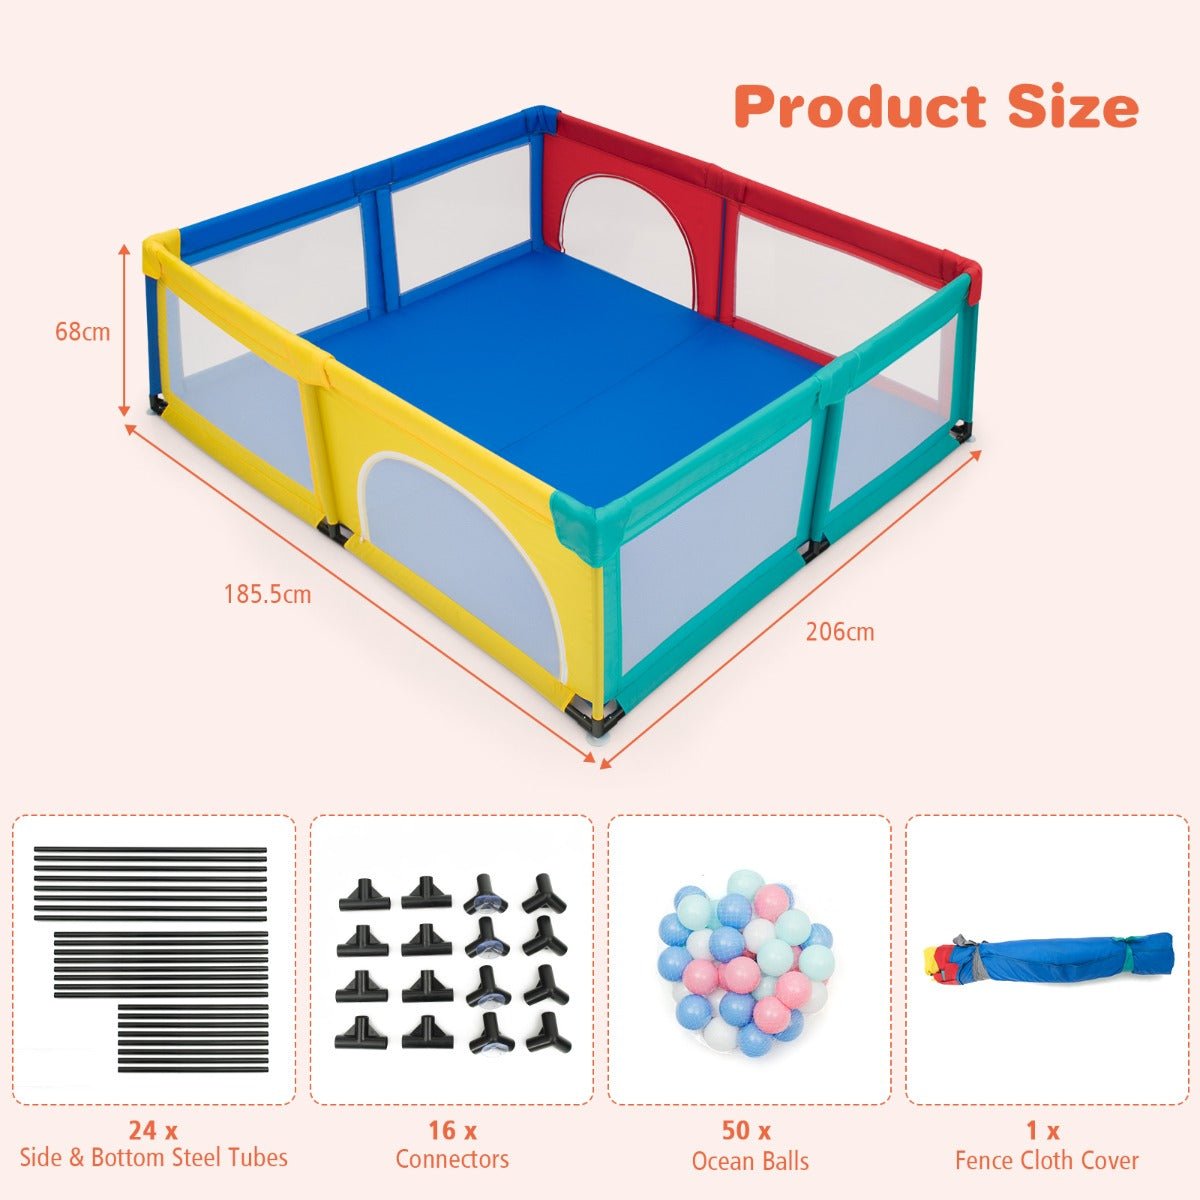 Extra Large Baby Playpen in Multicolour: Featuring Safety Gates & Mesh Walls